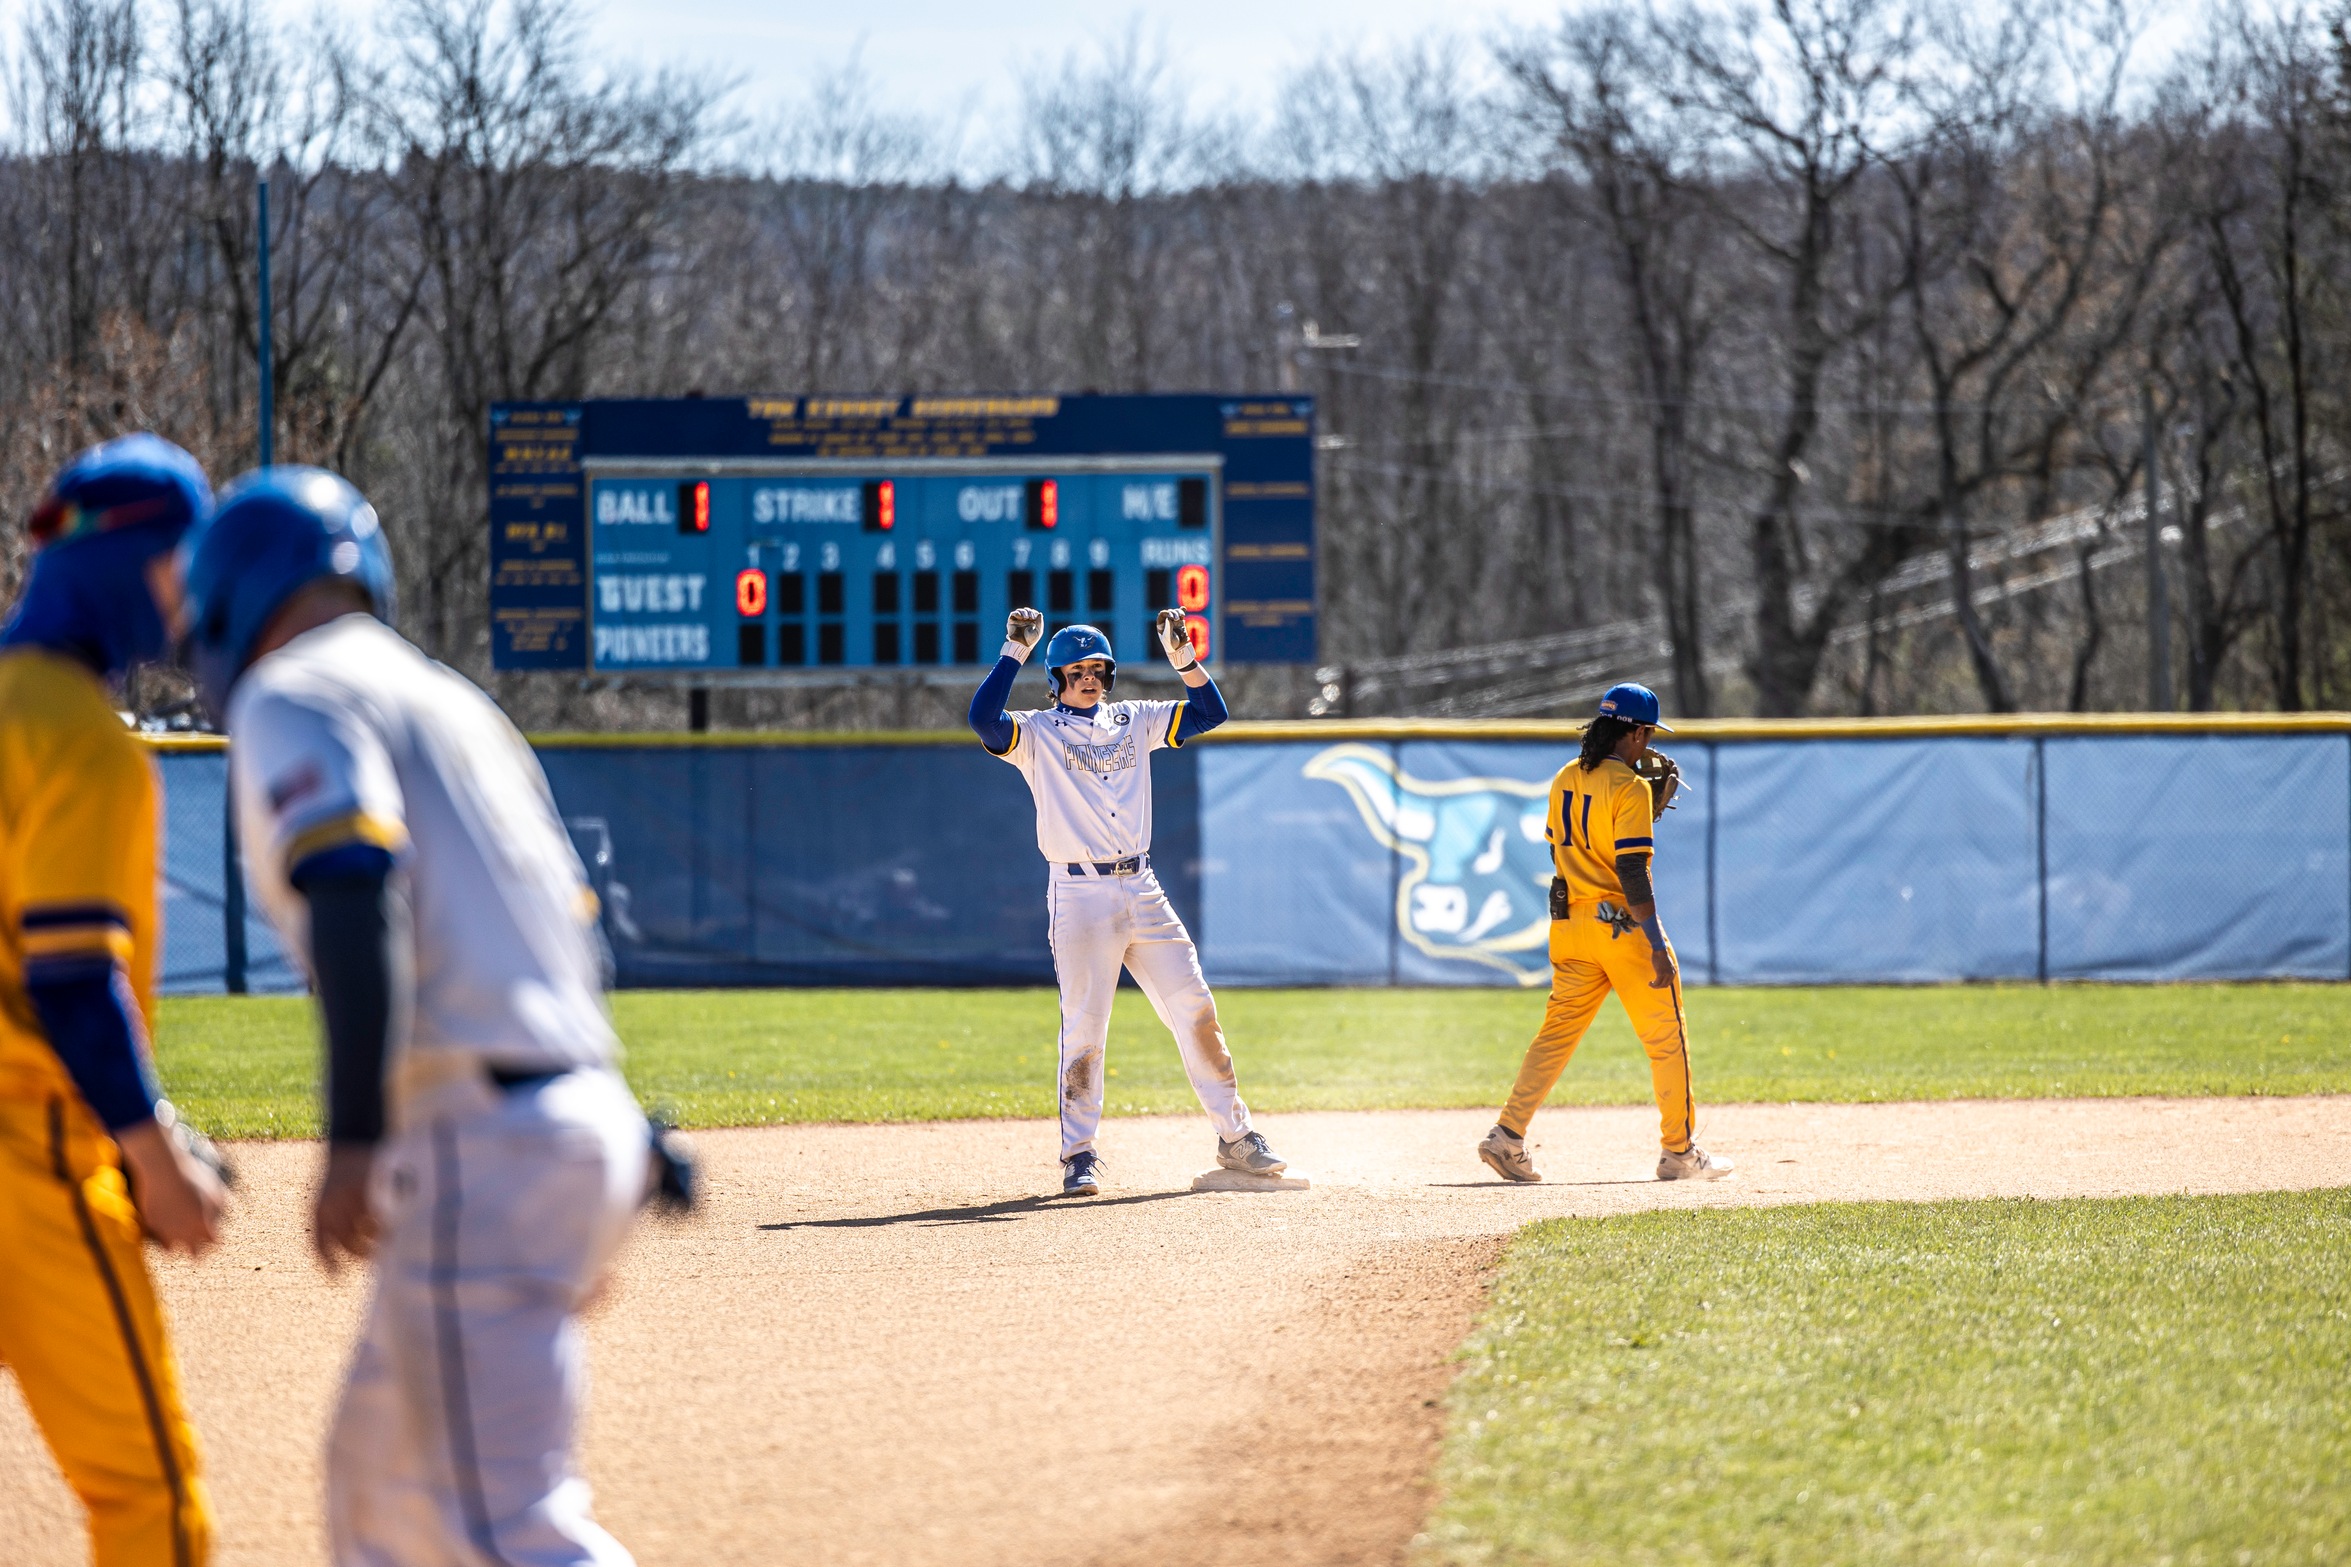 The Pioneers Walked Off Hilbert On The Way Too Sweeping The Series